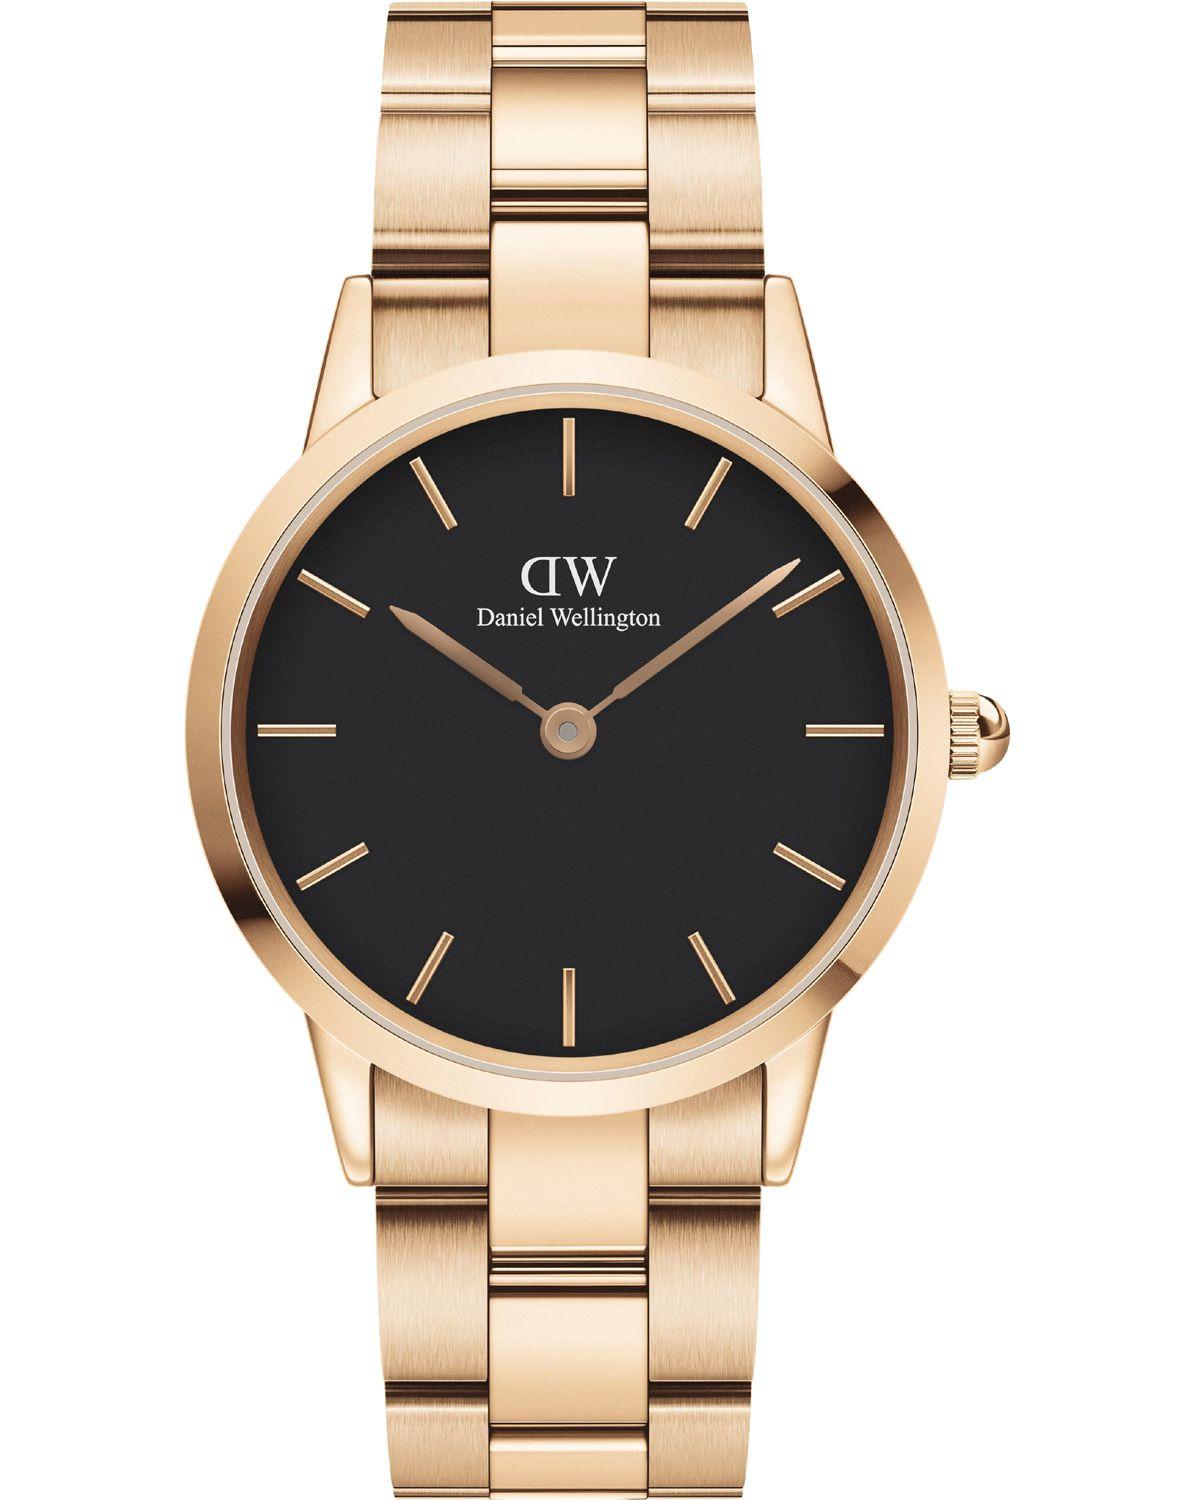 DANIEL WELLINGTON Iconic Link - DW00100210, Rose Gold case with Stainless Steel Bracelet